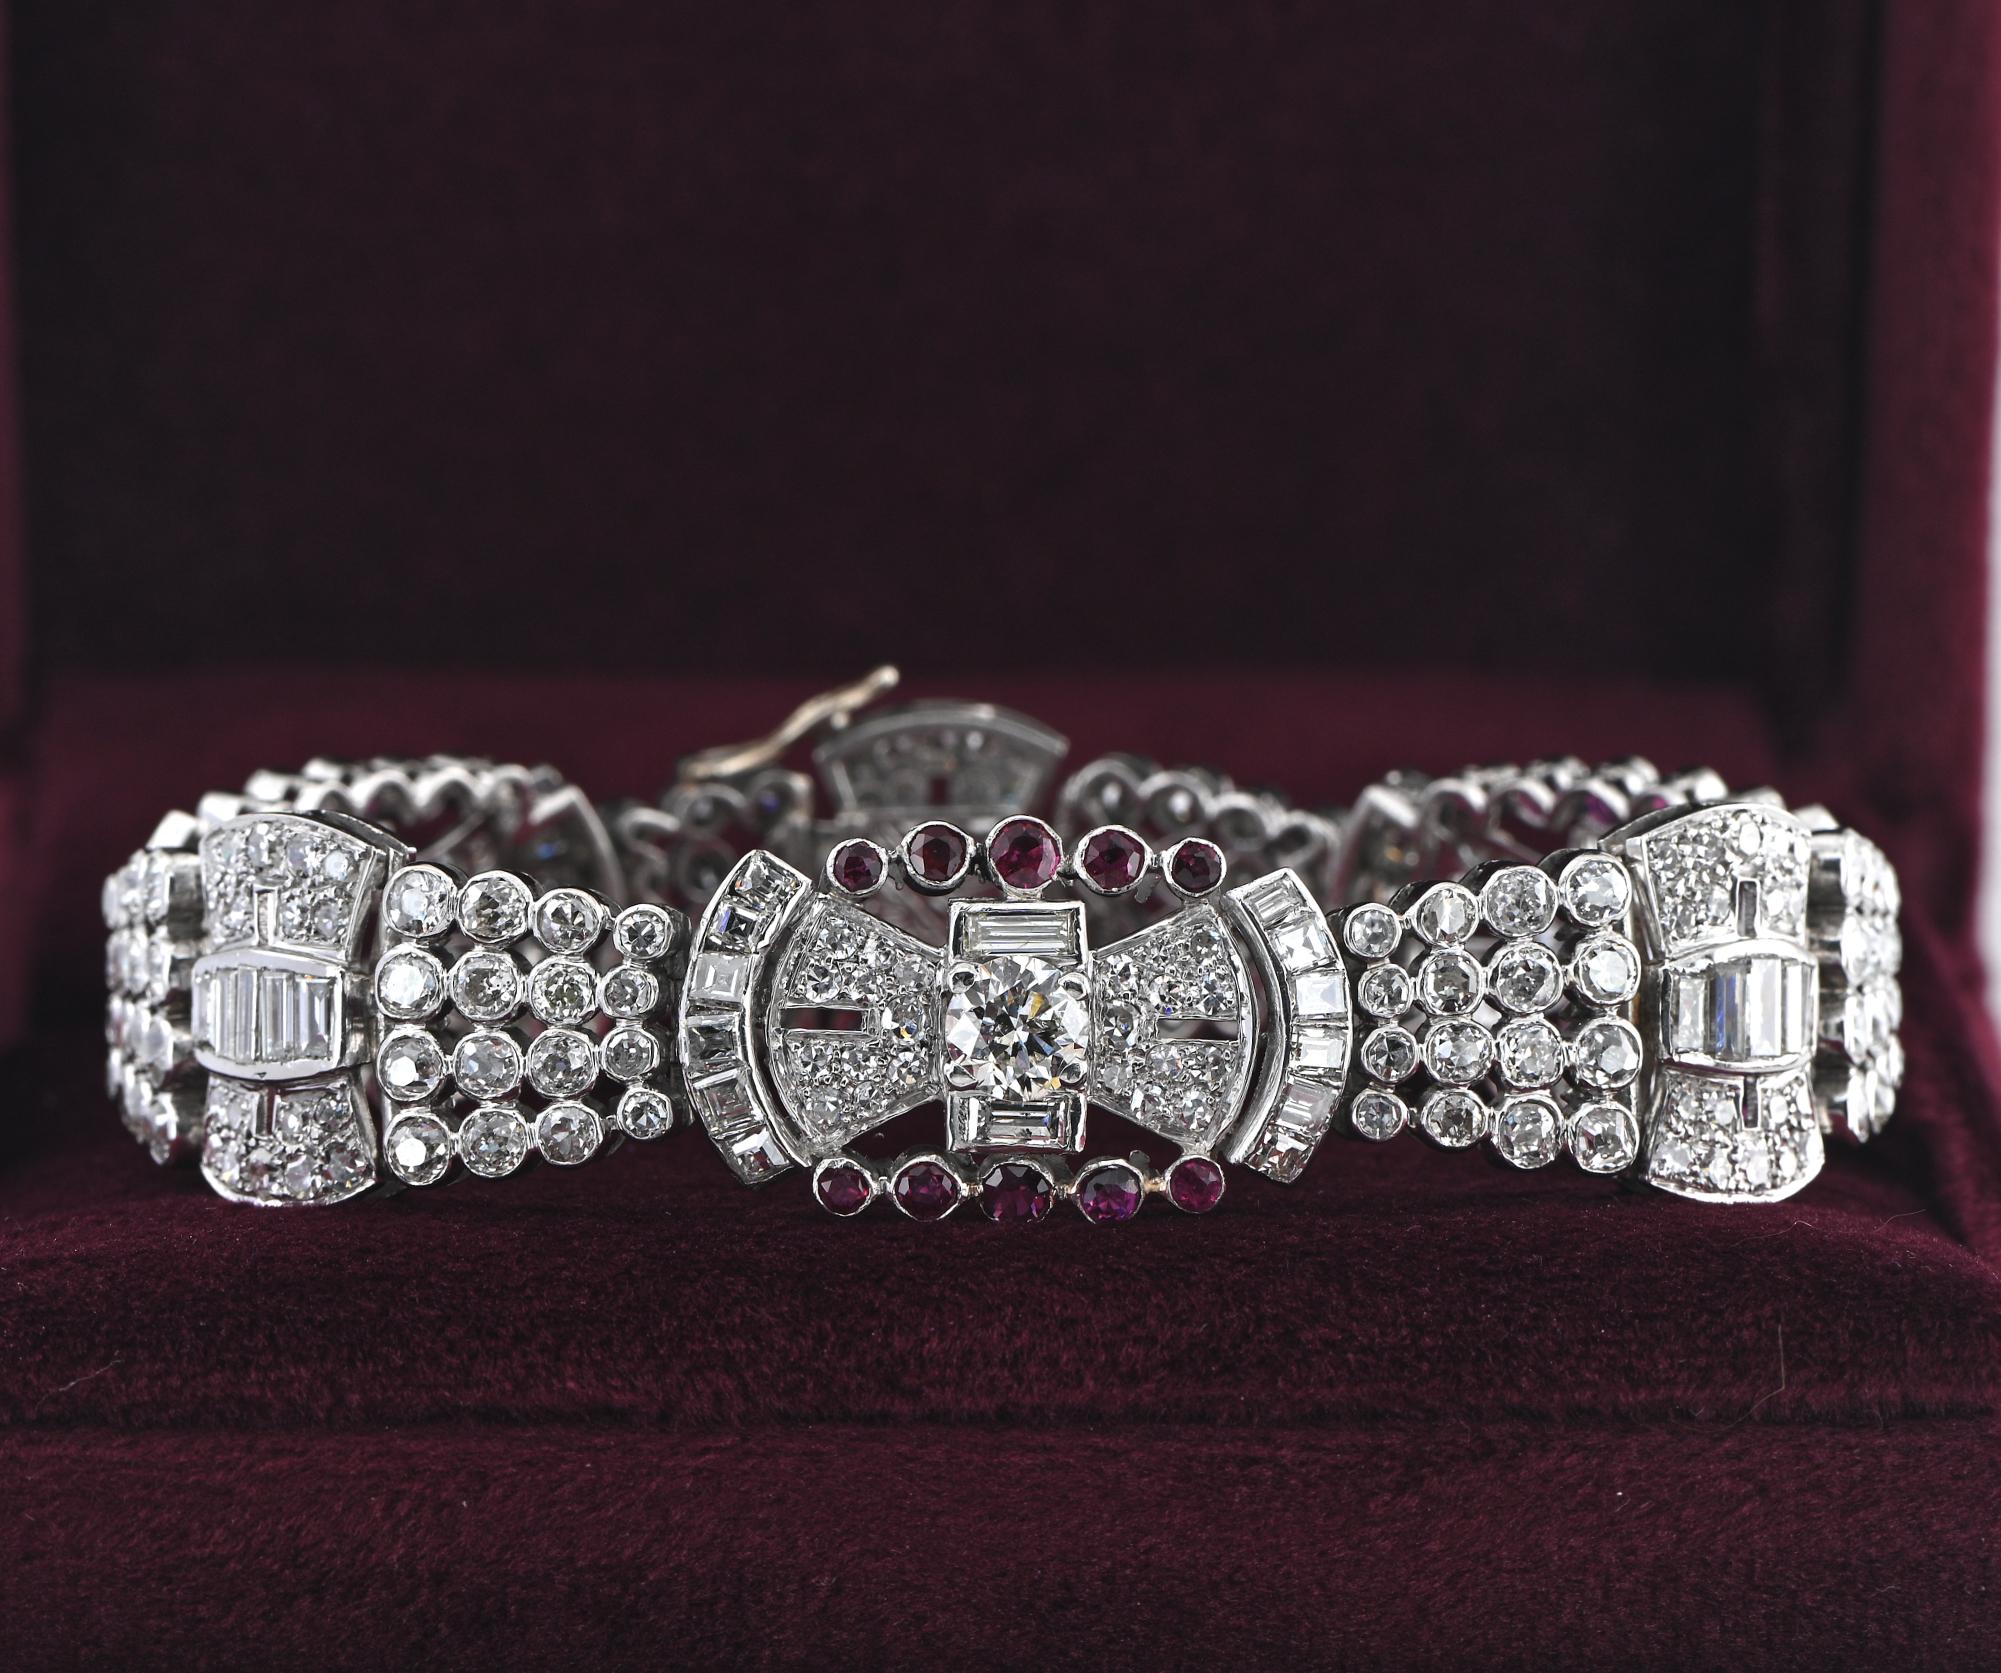 Roaring Jazz Era
This striking late Art Deco Diamond and Ruby wide bracelet express in full the glam and opulence of the era, 1930 ca
Breathtaking design composed by the various Diamonds cut creating a geometric elegant and timeless pattern to